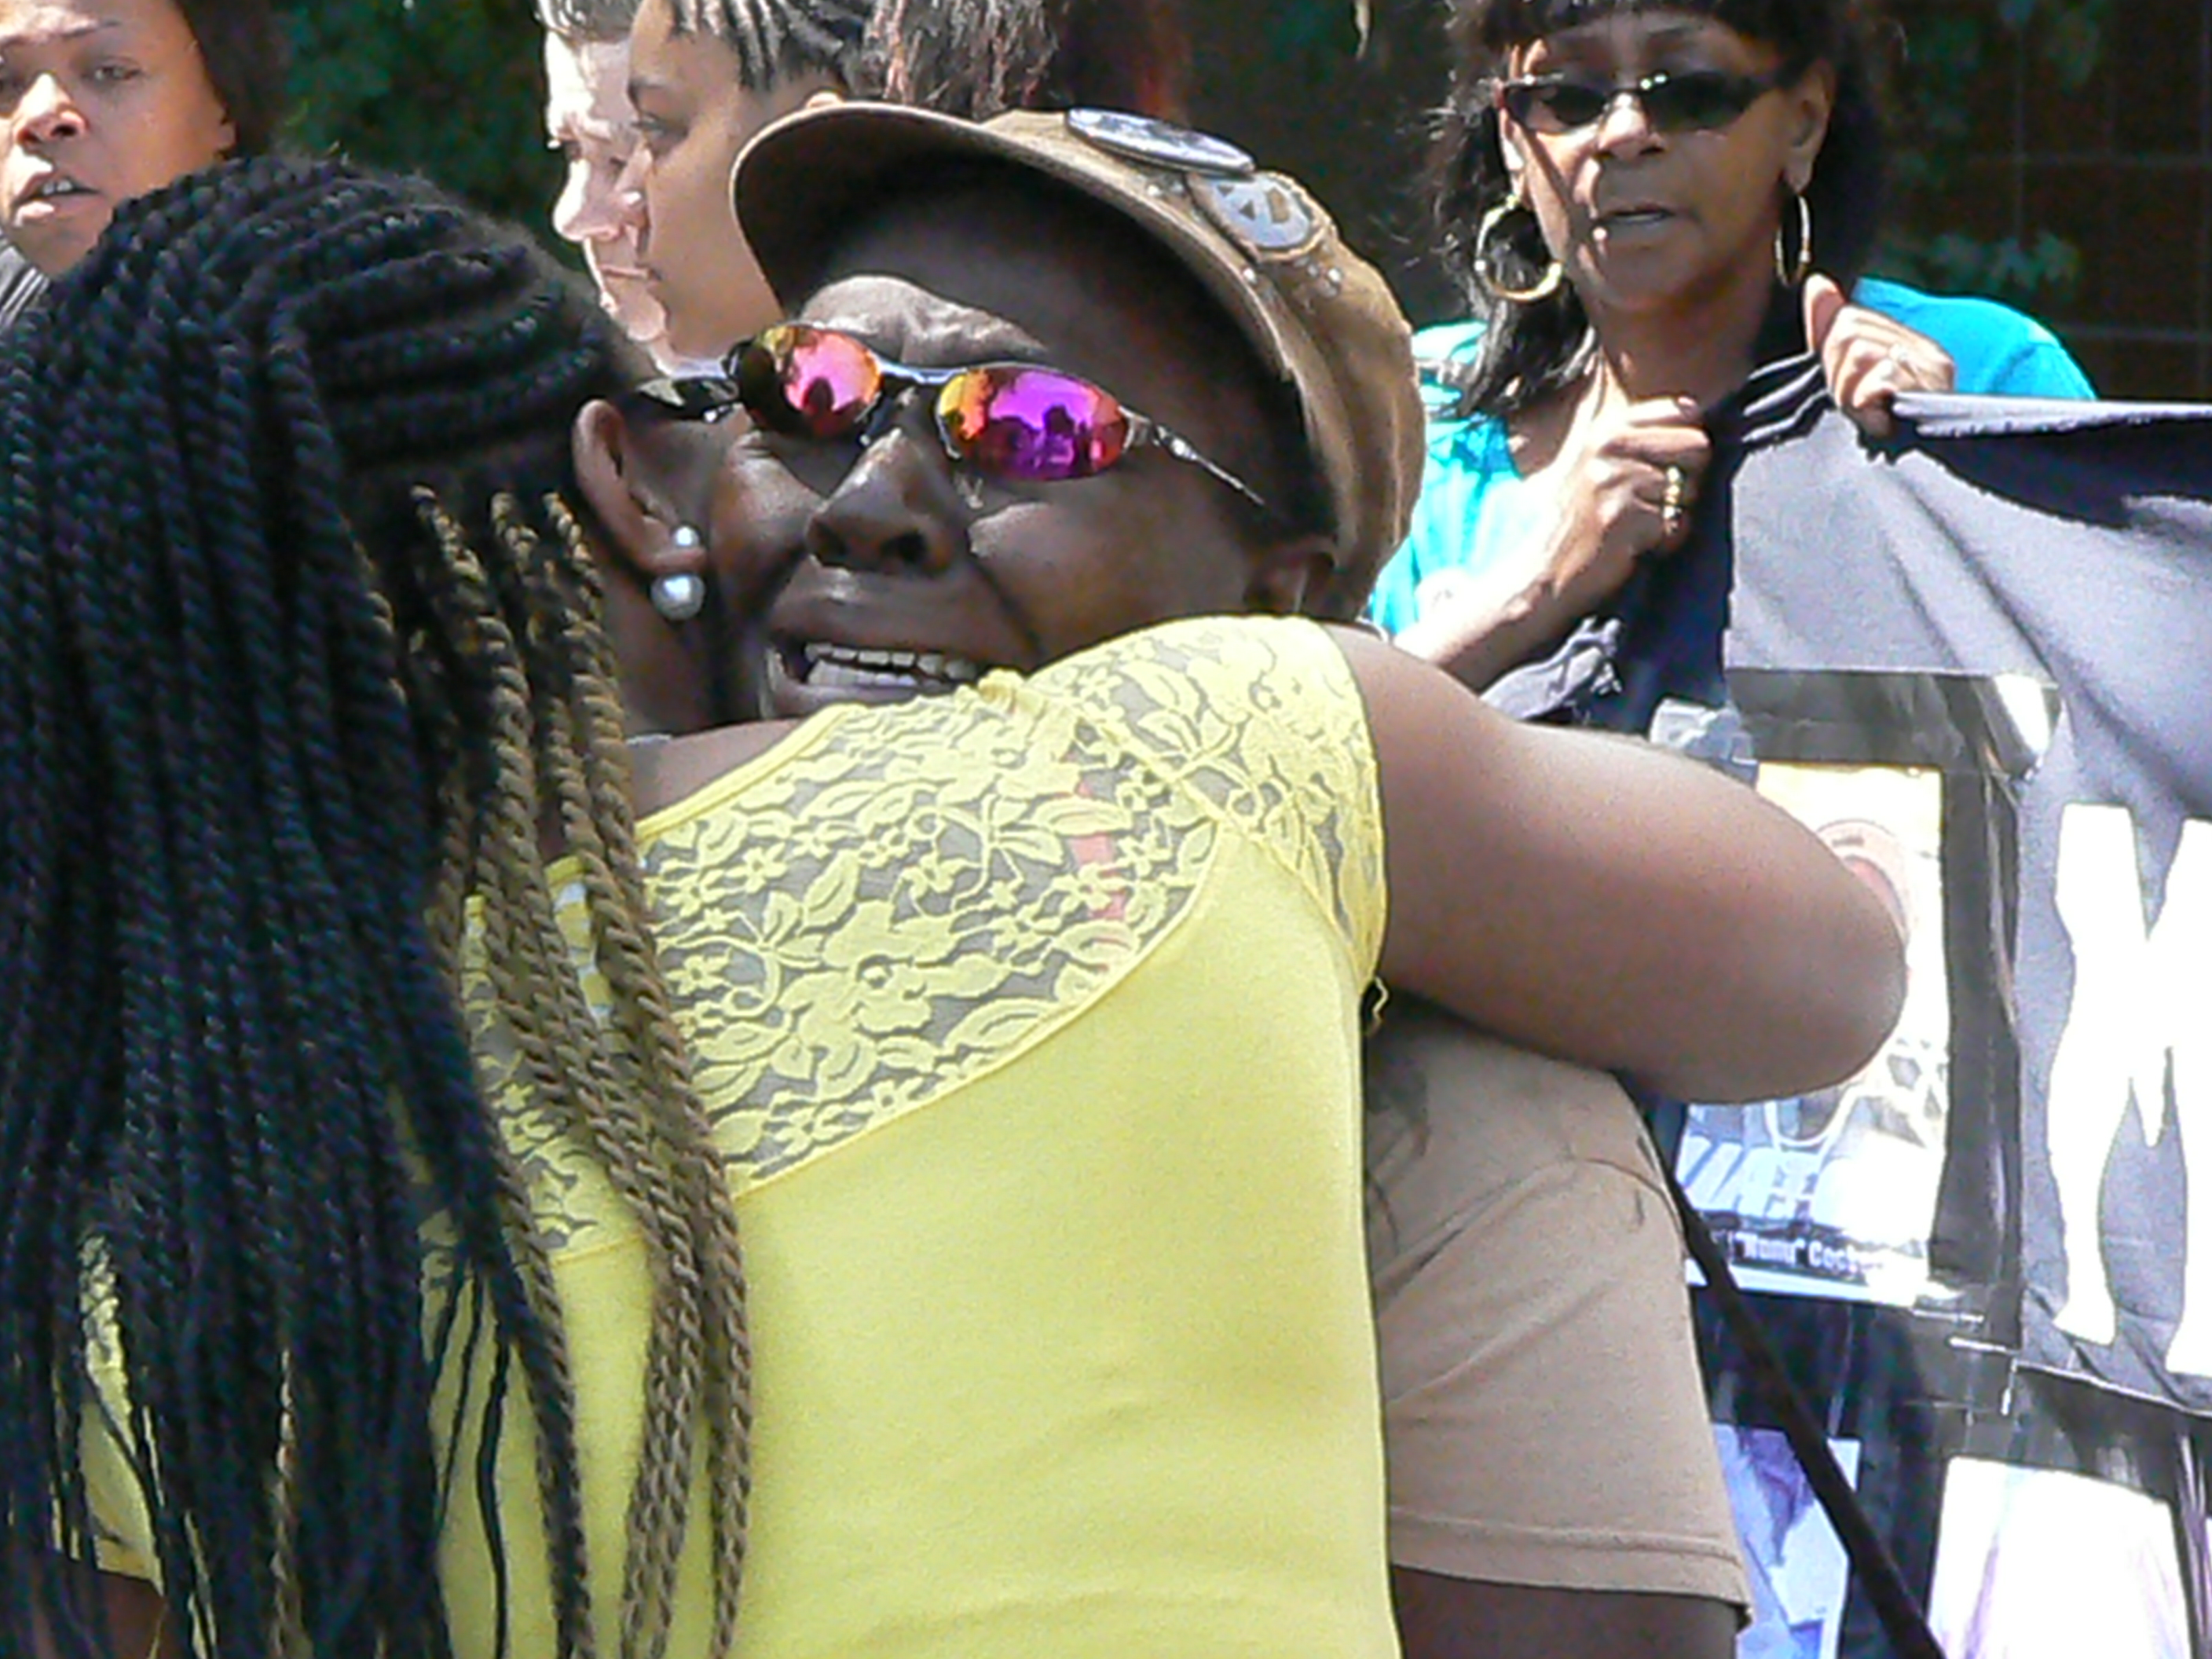 Mertilla Jones is comforted after describing how her 7-year-old granddaughter was killed by a white Detroit police officer.